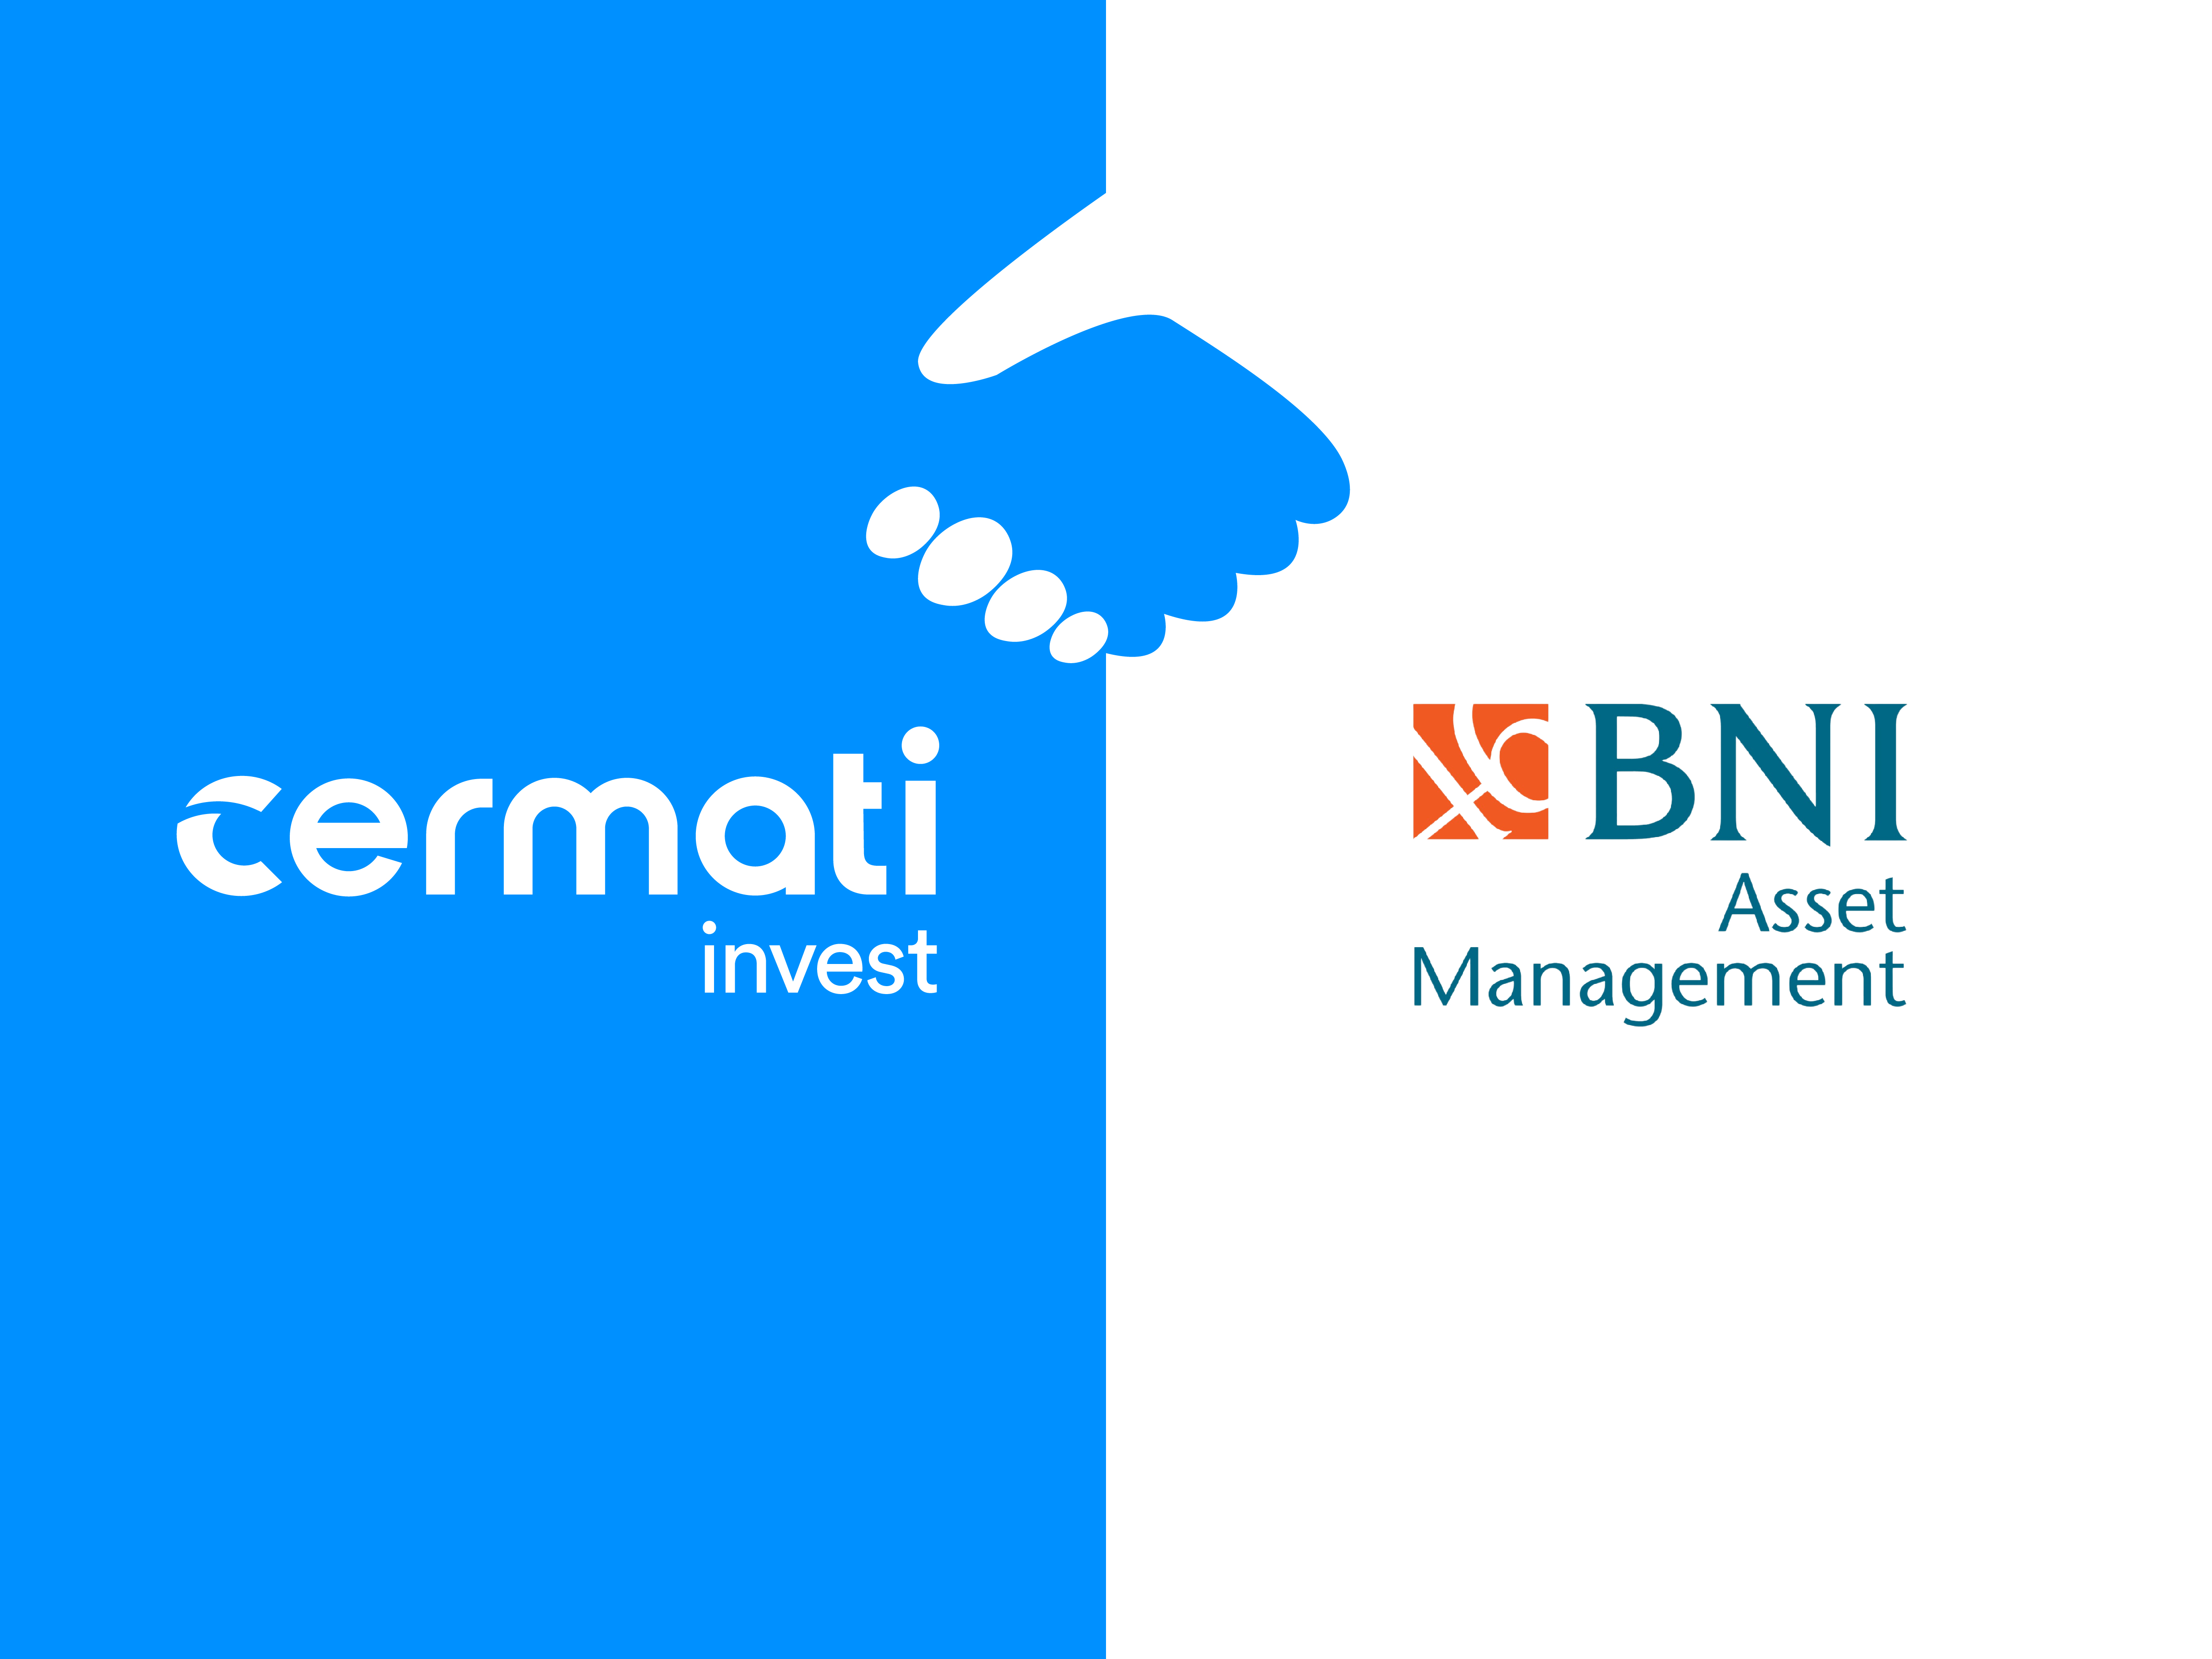 Targeting Retail Customers, Pay Attention to Investing in Collaboration with BNI Asset Management